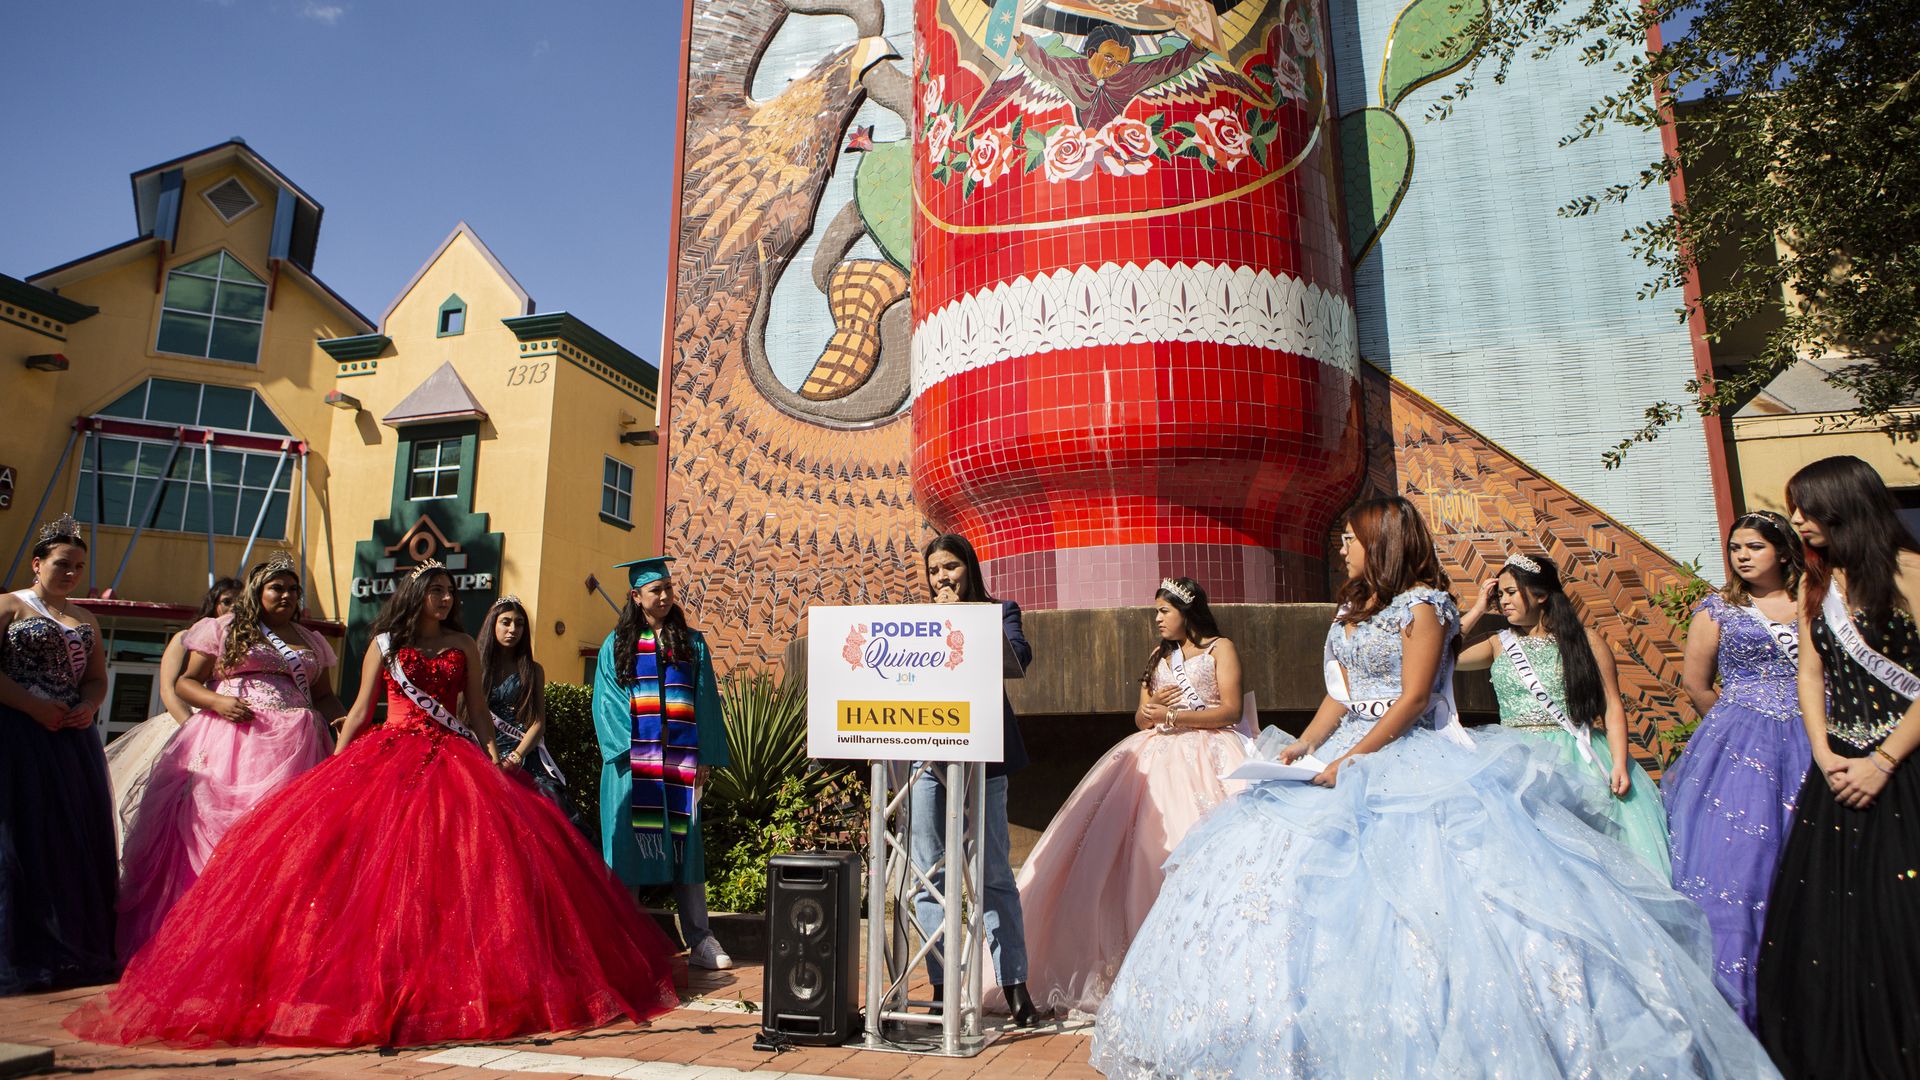 Actress America Ferrera stands at a press conference surrounded by teen girls wearing colorful quinceañera gowns. 